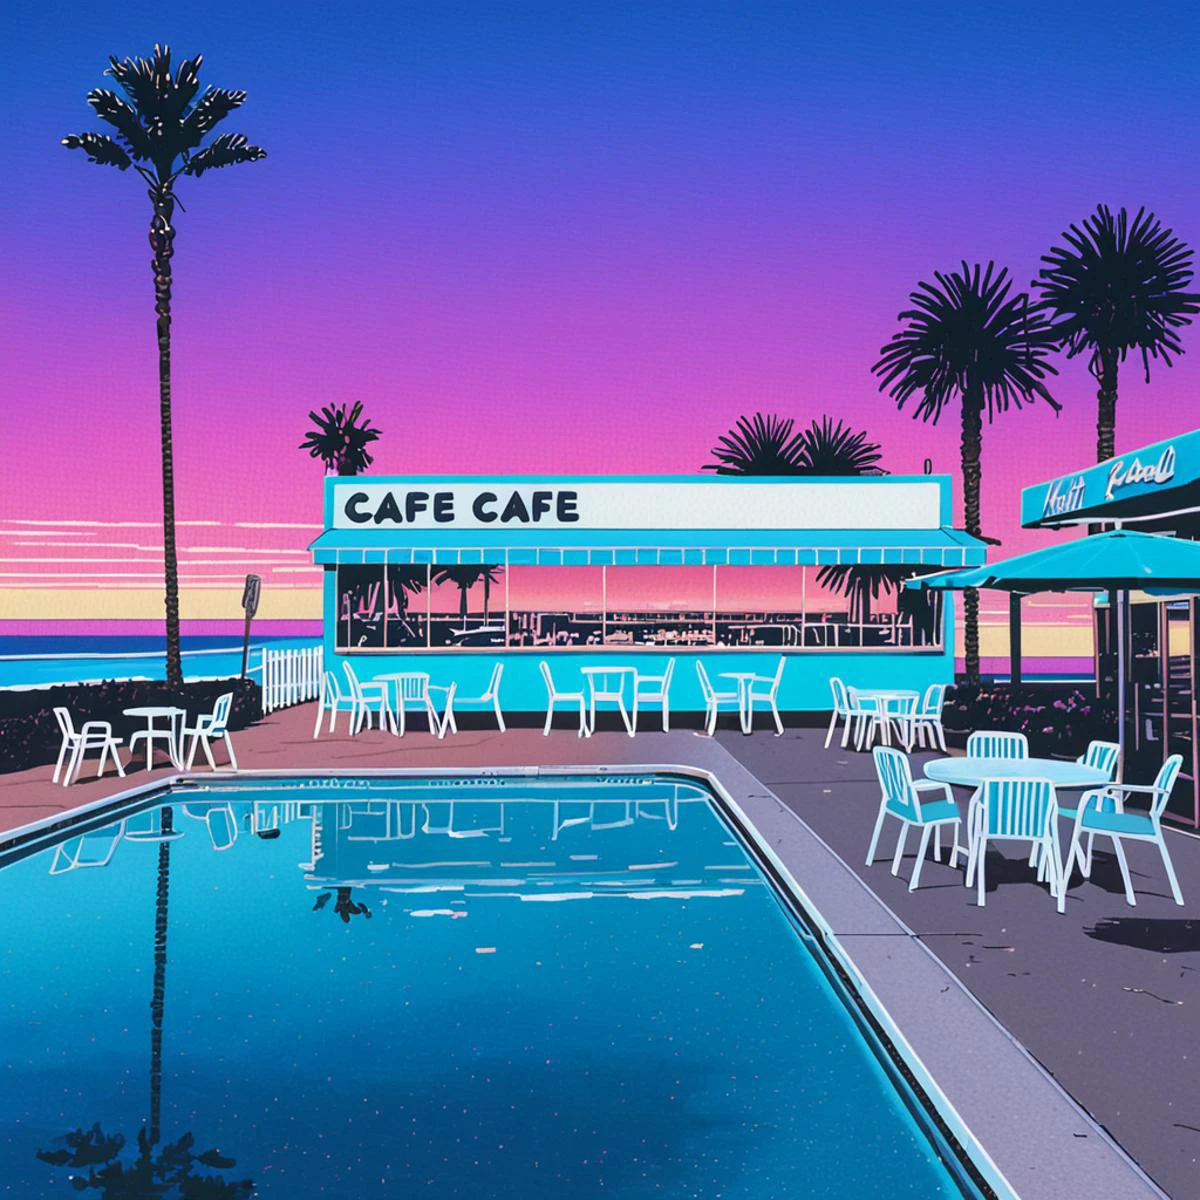 Lifted view of A Vintage 80's Cafe with pool surrounded by beach and Palm Trees at sunset, グラデーションの空, 水の反射, 道, 椅子, 建物, 